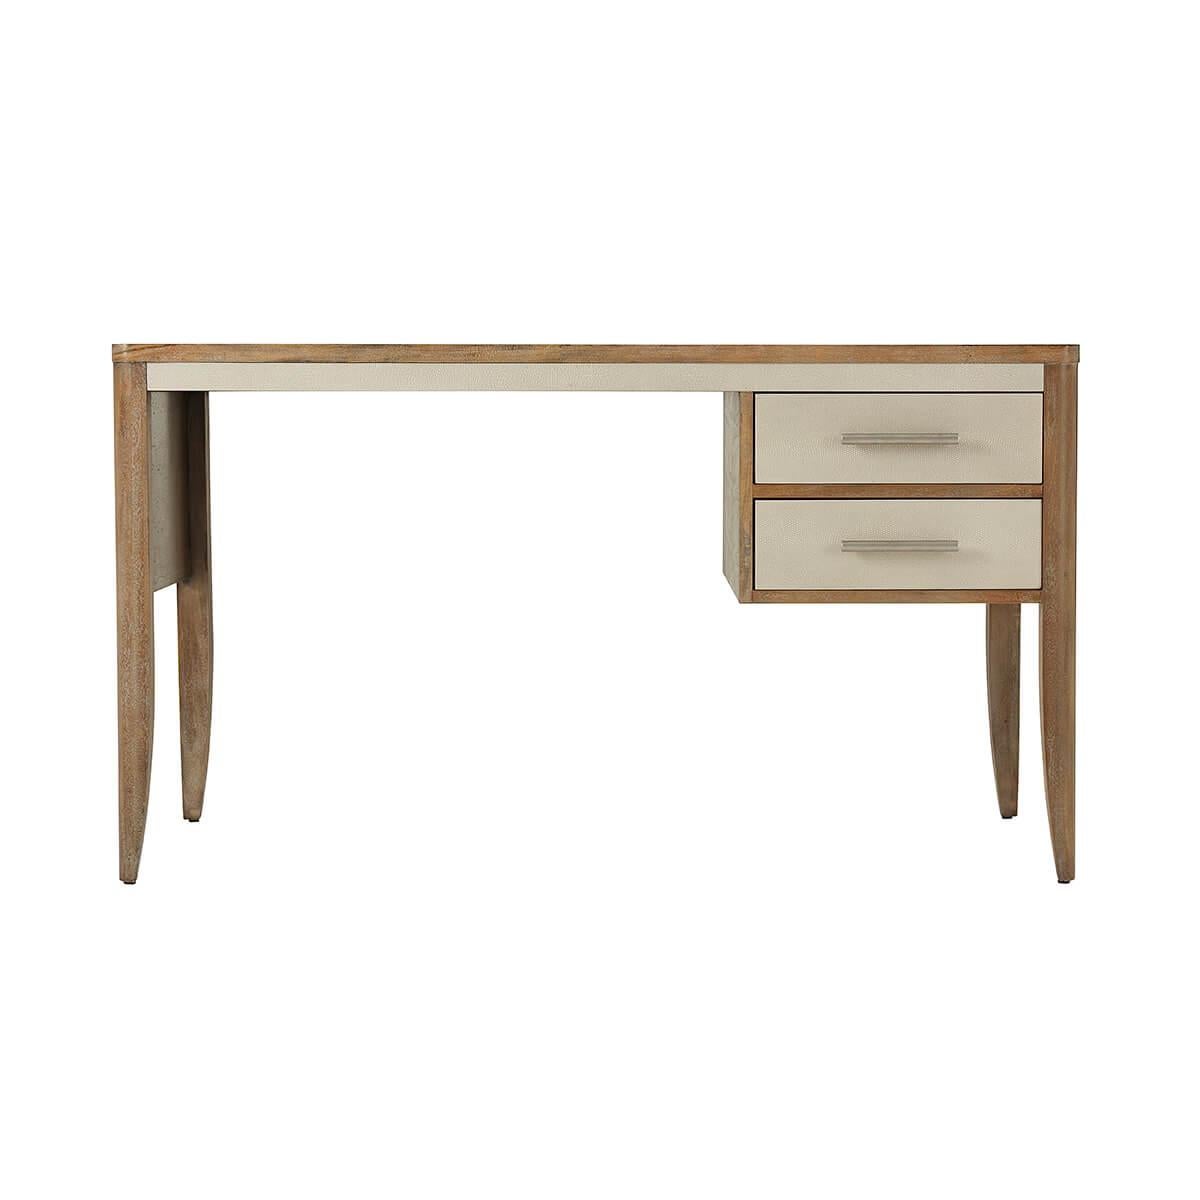 A French two drawer desk with our mangrove beech veneer finish, embossed leather wrapped frieze and drawers with brushed brass finish handles.
Dimensions: 54